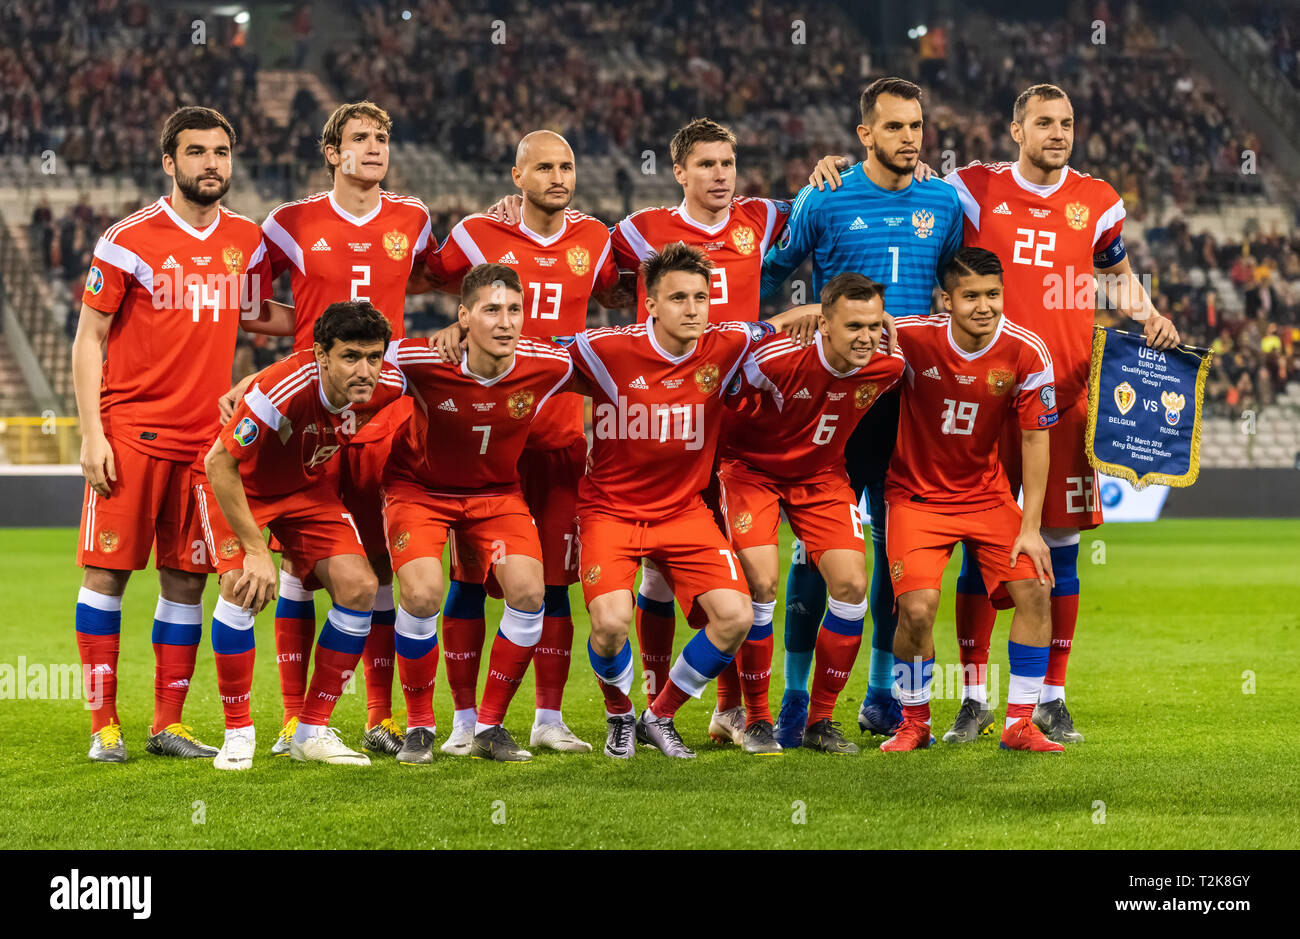 Brussels, Belgium - March 20, 2019. Team photo of Russia national team ahead of UEFA Euro 2020 qualification match Belgium vs Russia in Brussels. Stock Photo